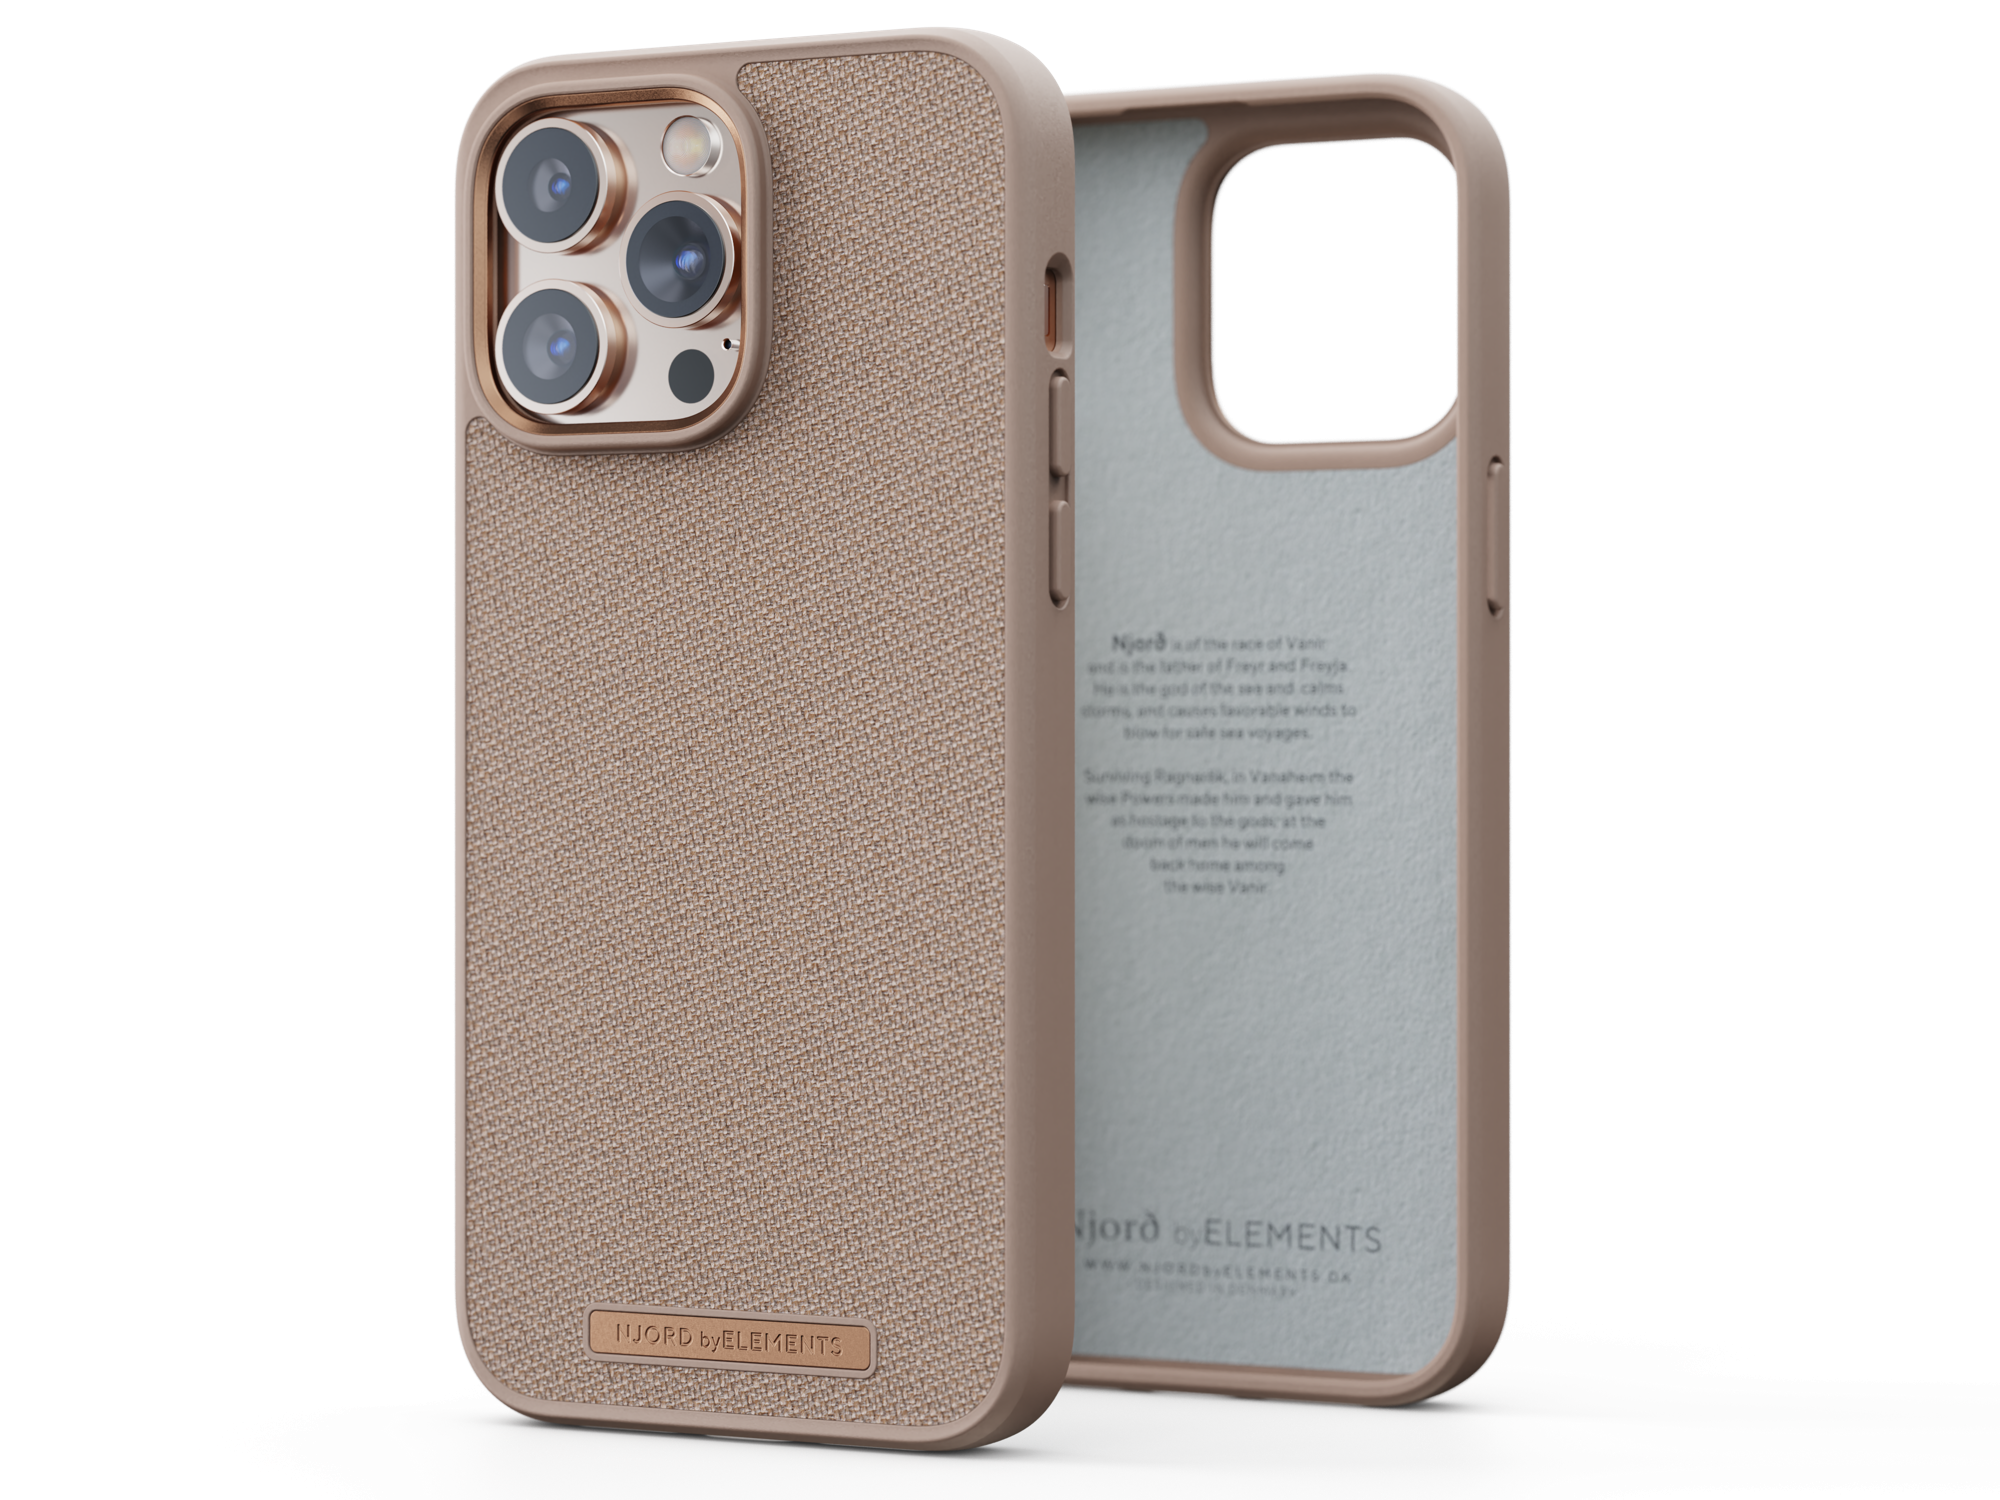 NJORD Backcover, Case, Pro Apple, iPhone Sand Max, Rosa 14 Just